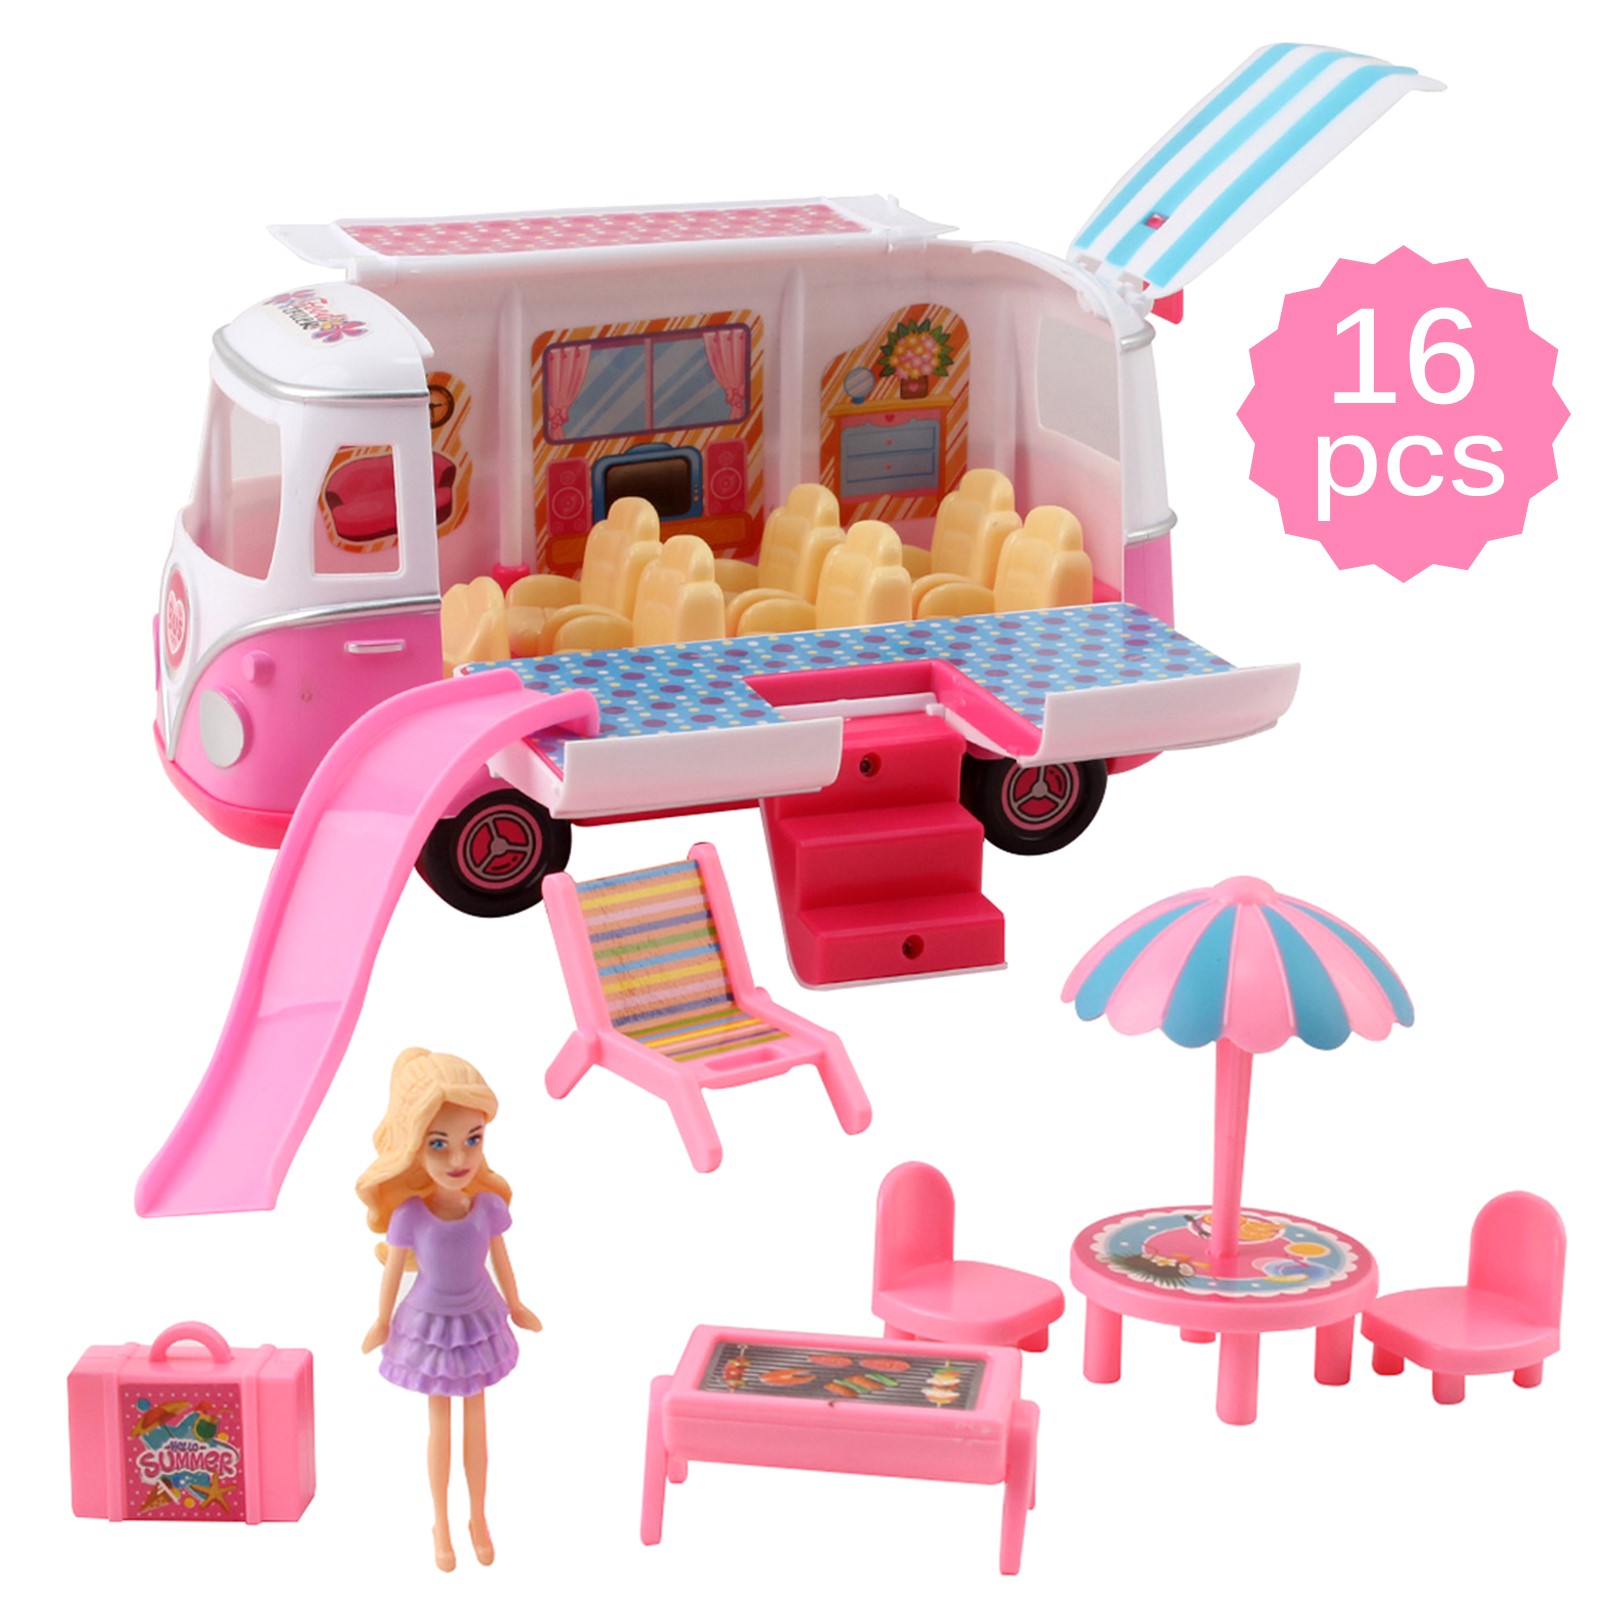 Vokodo Picnic Adventure Van With Doll Figurine Includes Slide Patio Furniture And Wardrobe Kids Pretend Play Party Bus Cooking Truck Kitchen Vogue Toy Fashion Car Vehicle Great Gift For Girls Children